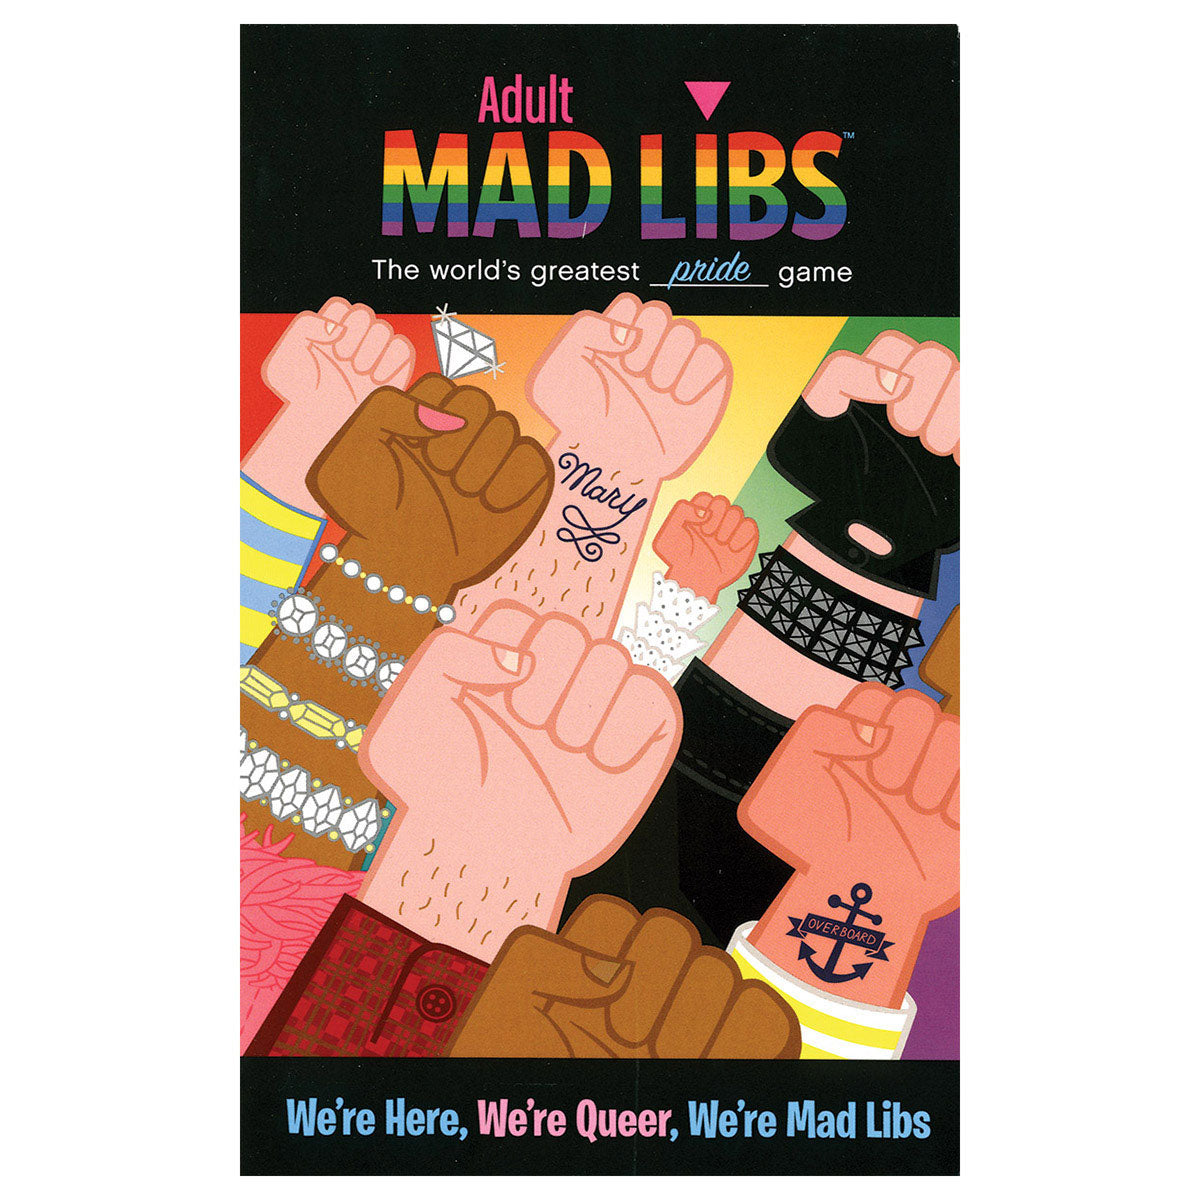 Adult Mad Libs: We're Here, We're Queer, We're Mad Libs - Price Stern Sloan